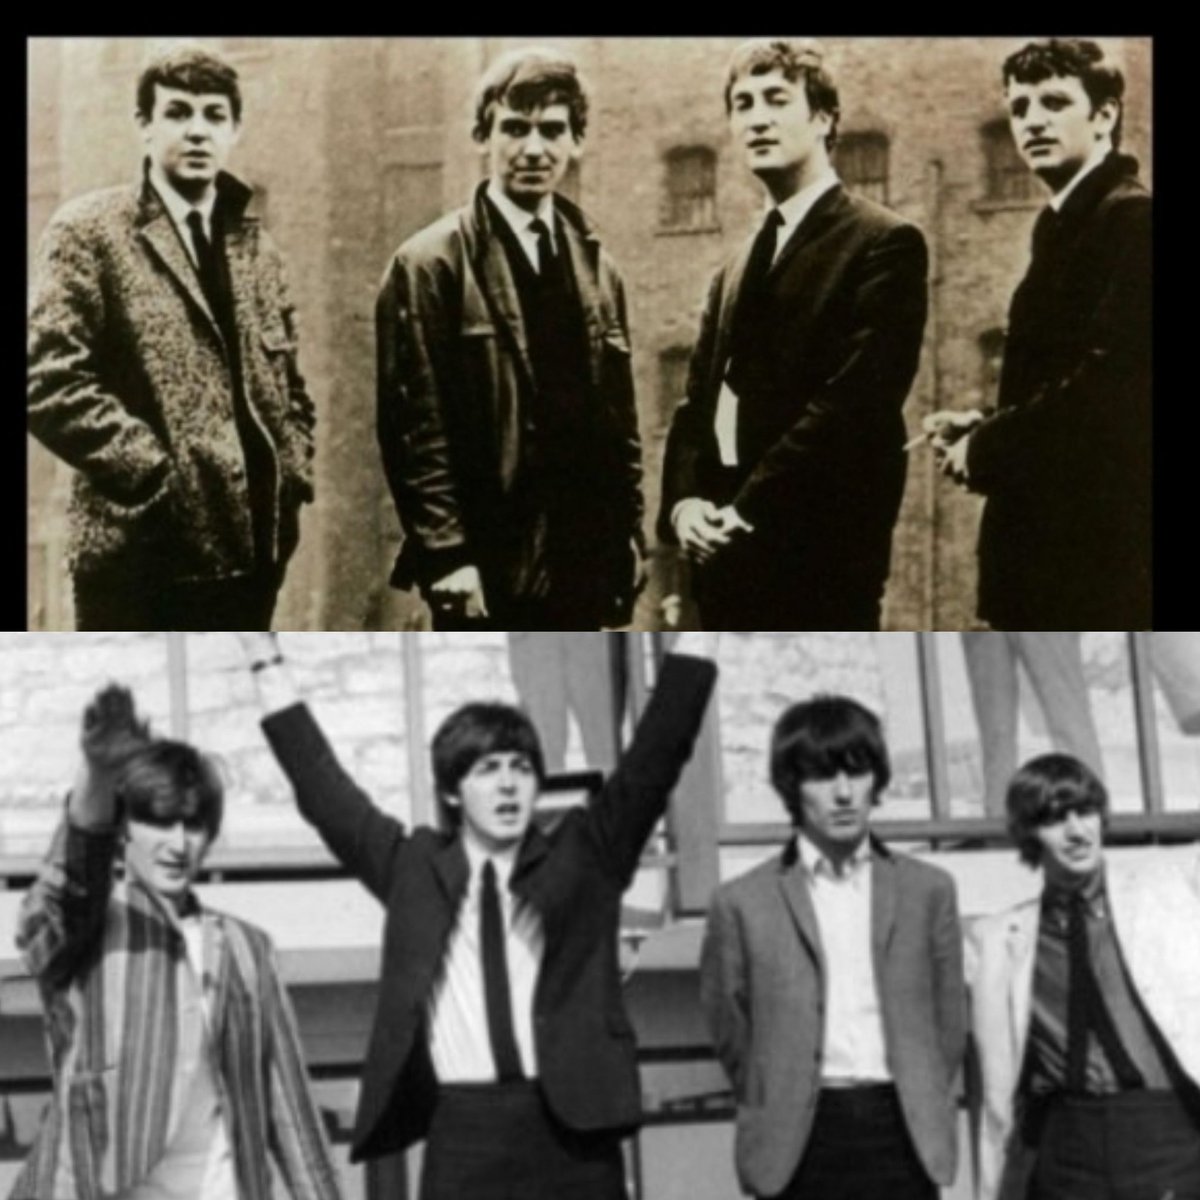 @realkiwasabi True Beatles in 1964 (13mins) 👇 youtu.be/MG-DXGKDBcA?si… Fake Beatles in 1965 (18mins)👇 youtu.be/S9InKRQbC4I?si… All four Beatles were replaced at the end of the world tour in June 1964.